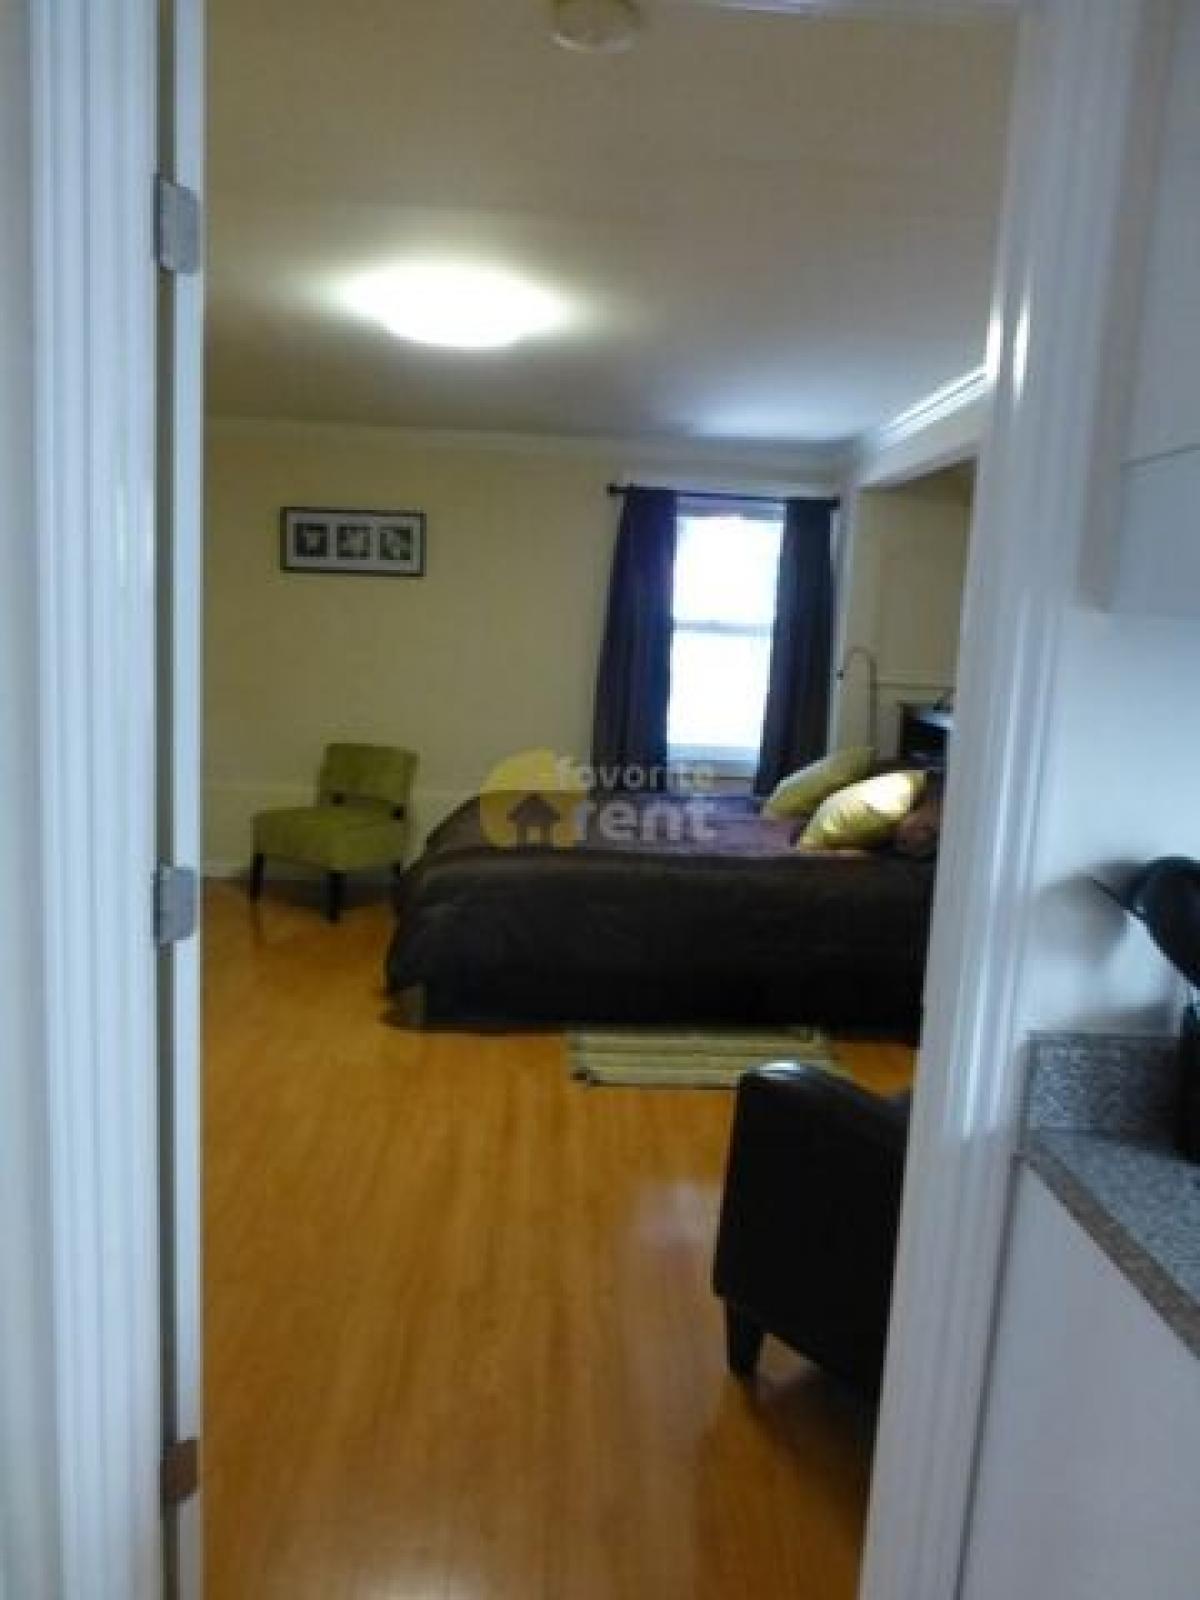 Picture of Home For Rent in San Francisco, California, United States